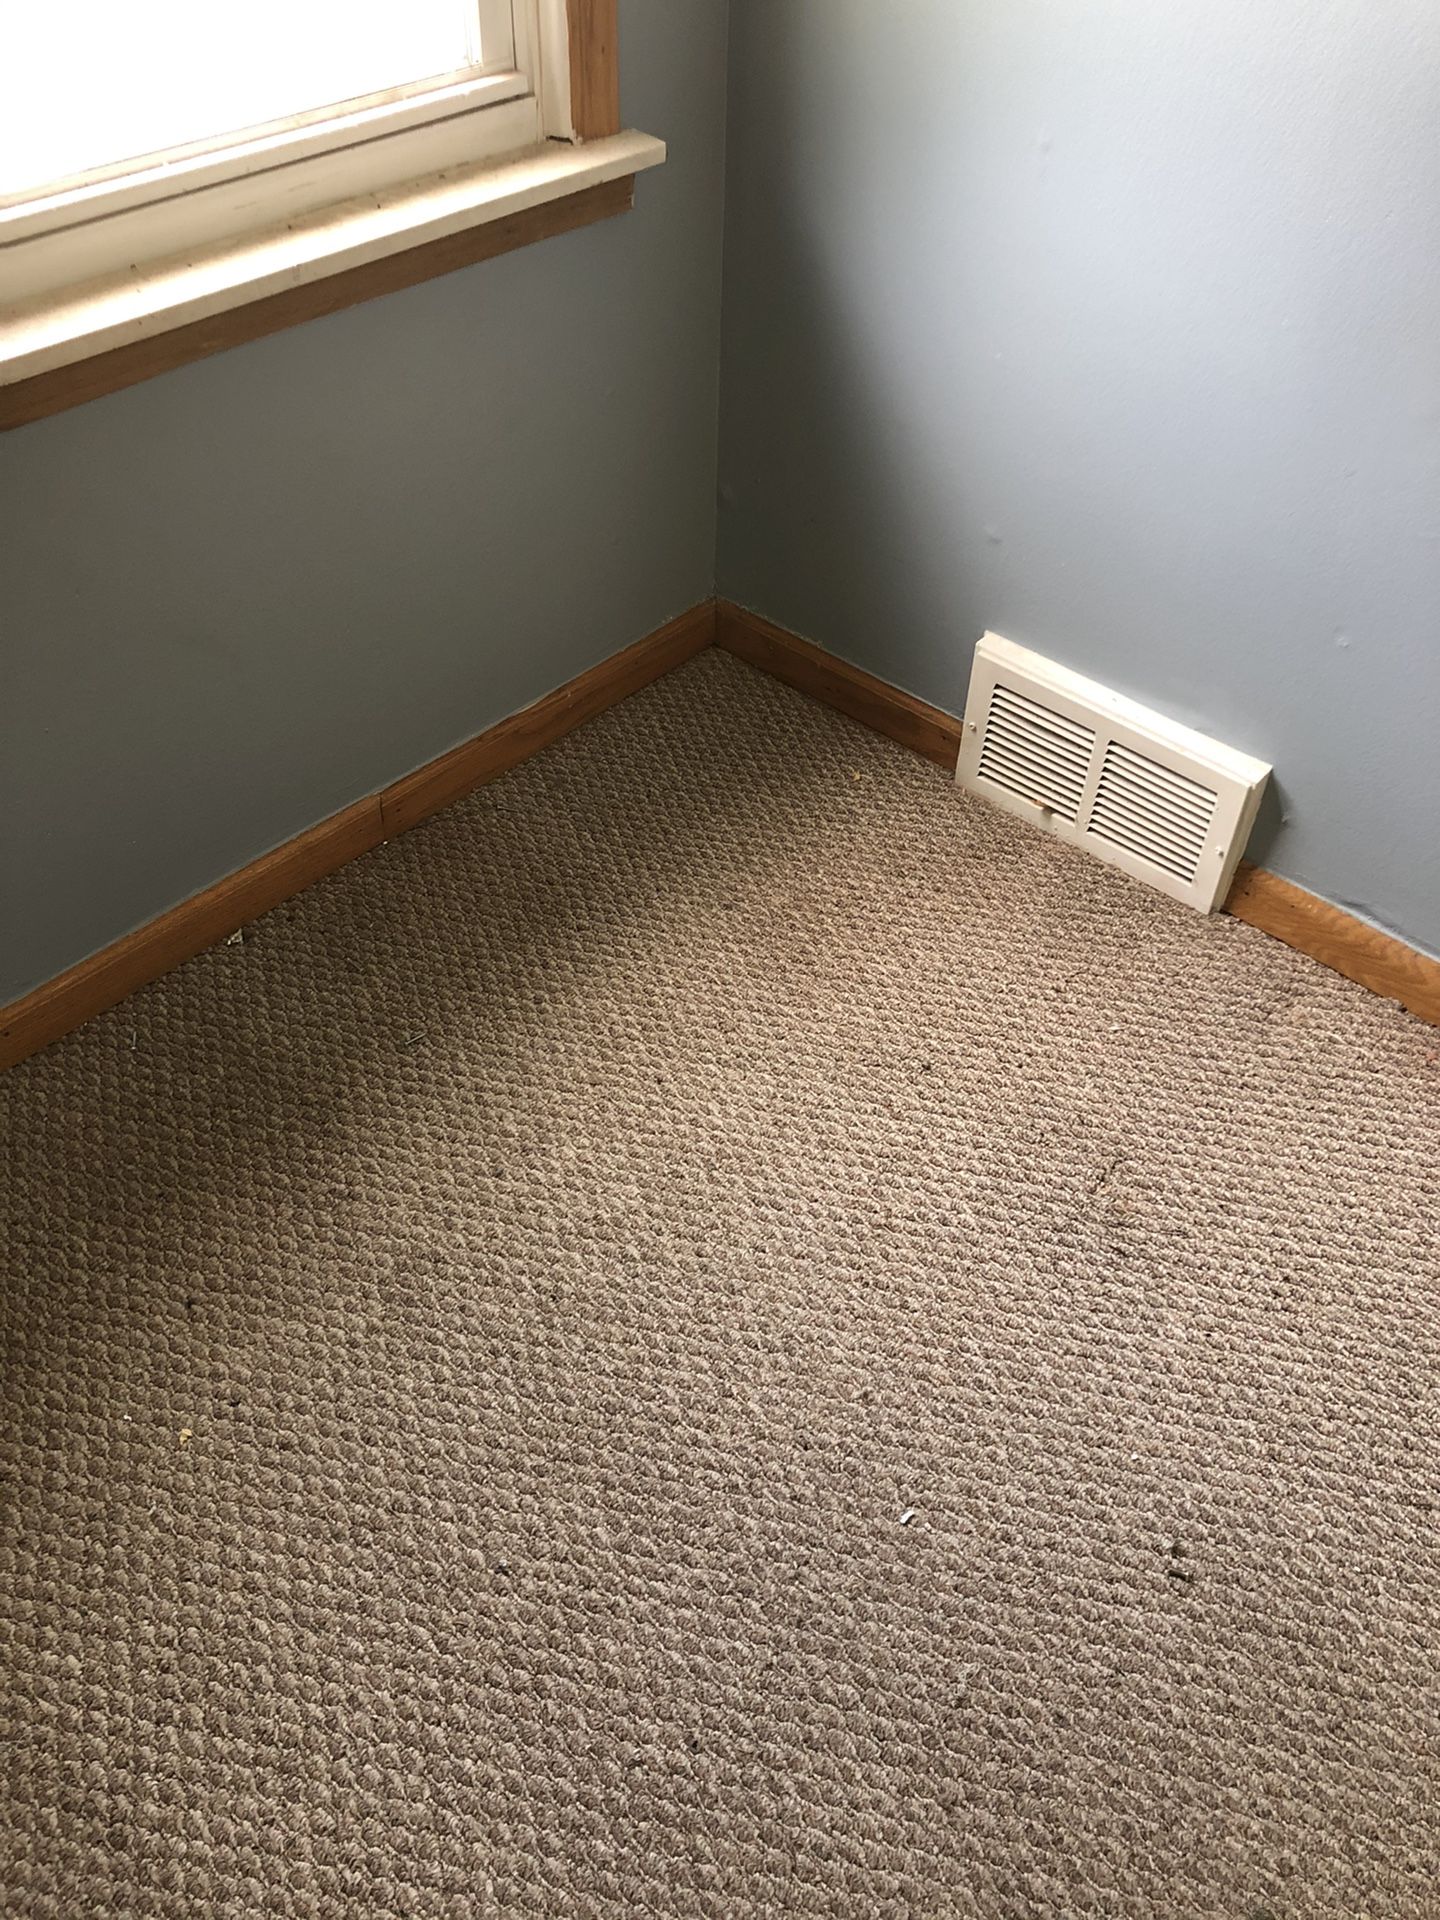 3 rooms of used carpet and pad